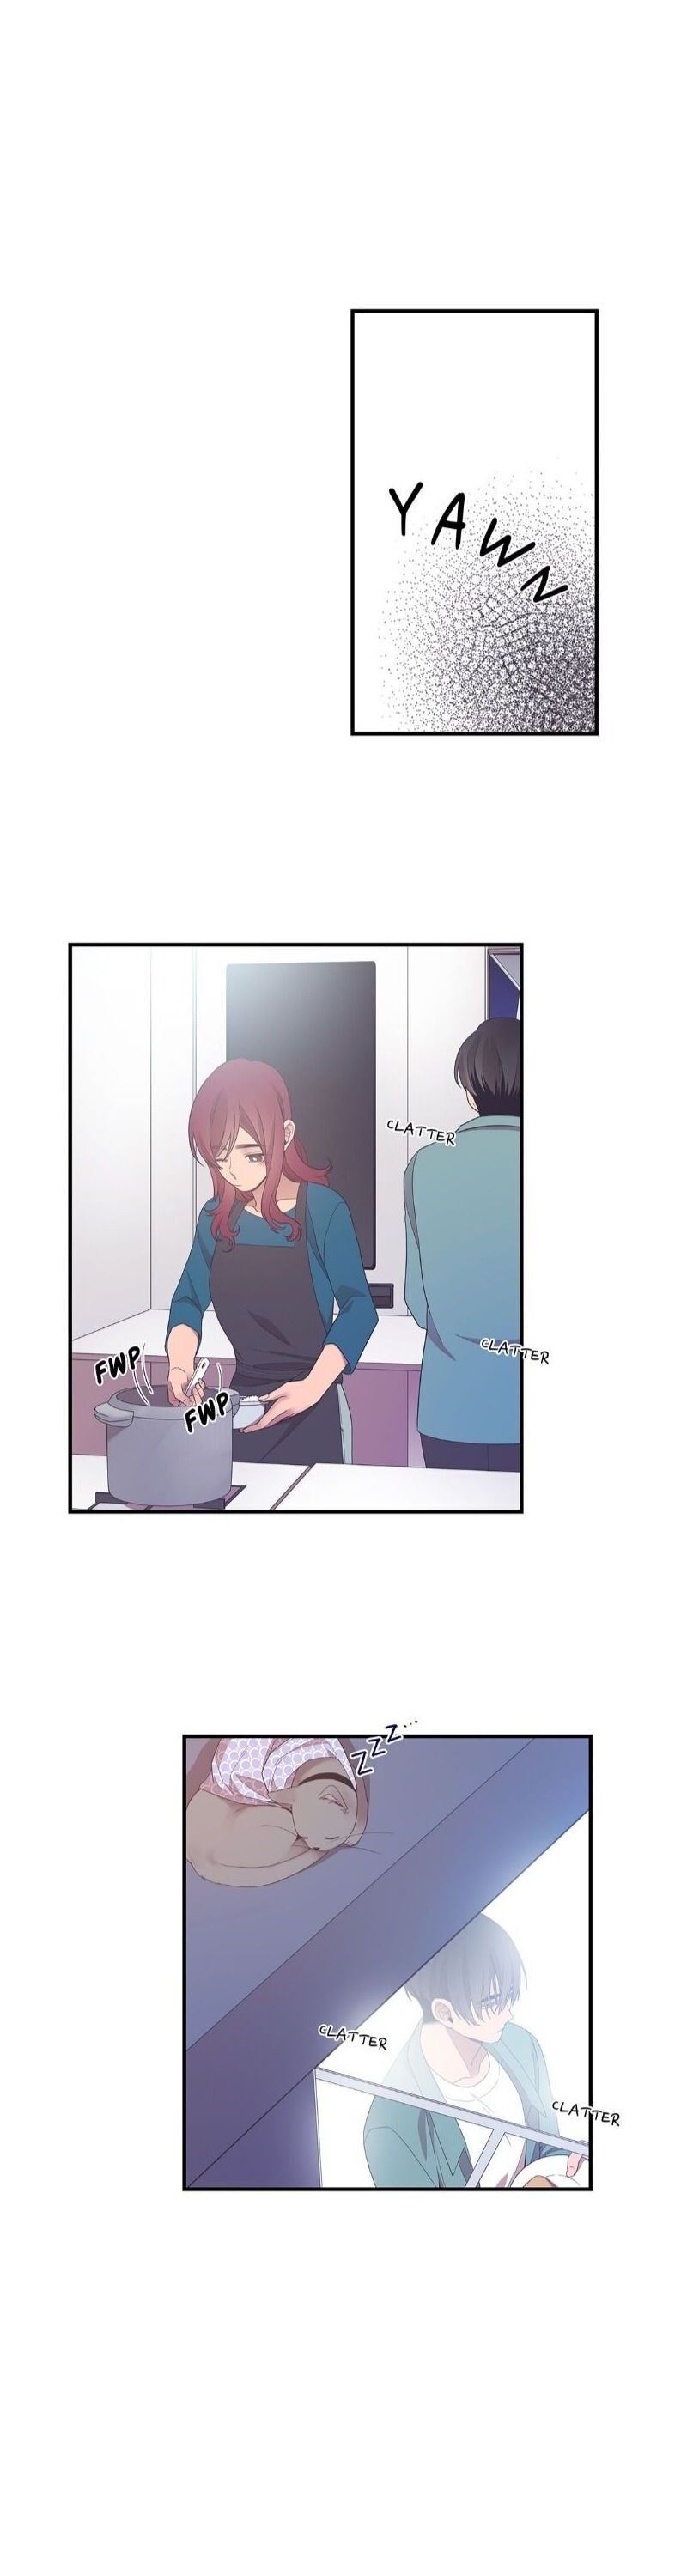 The Chef of Spirits Chapter 19